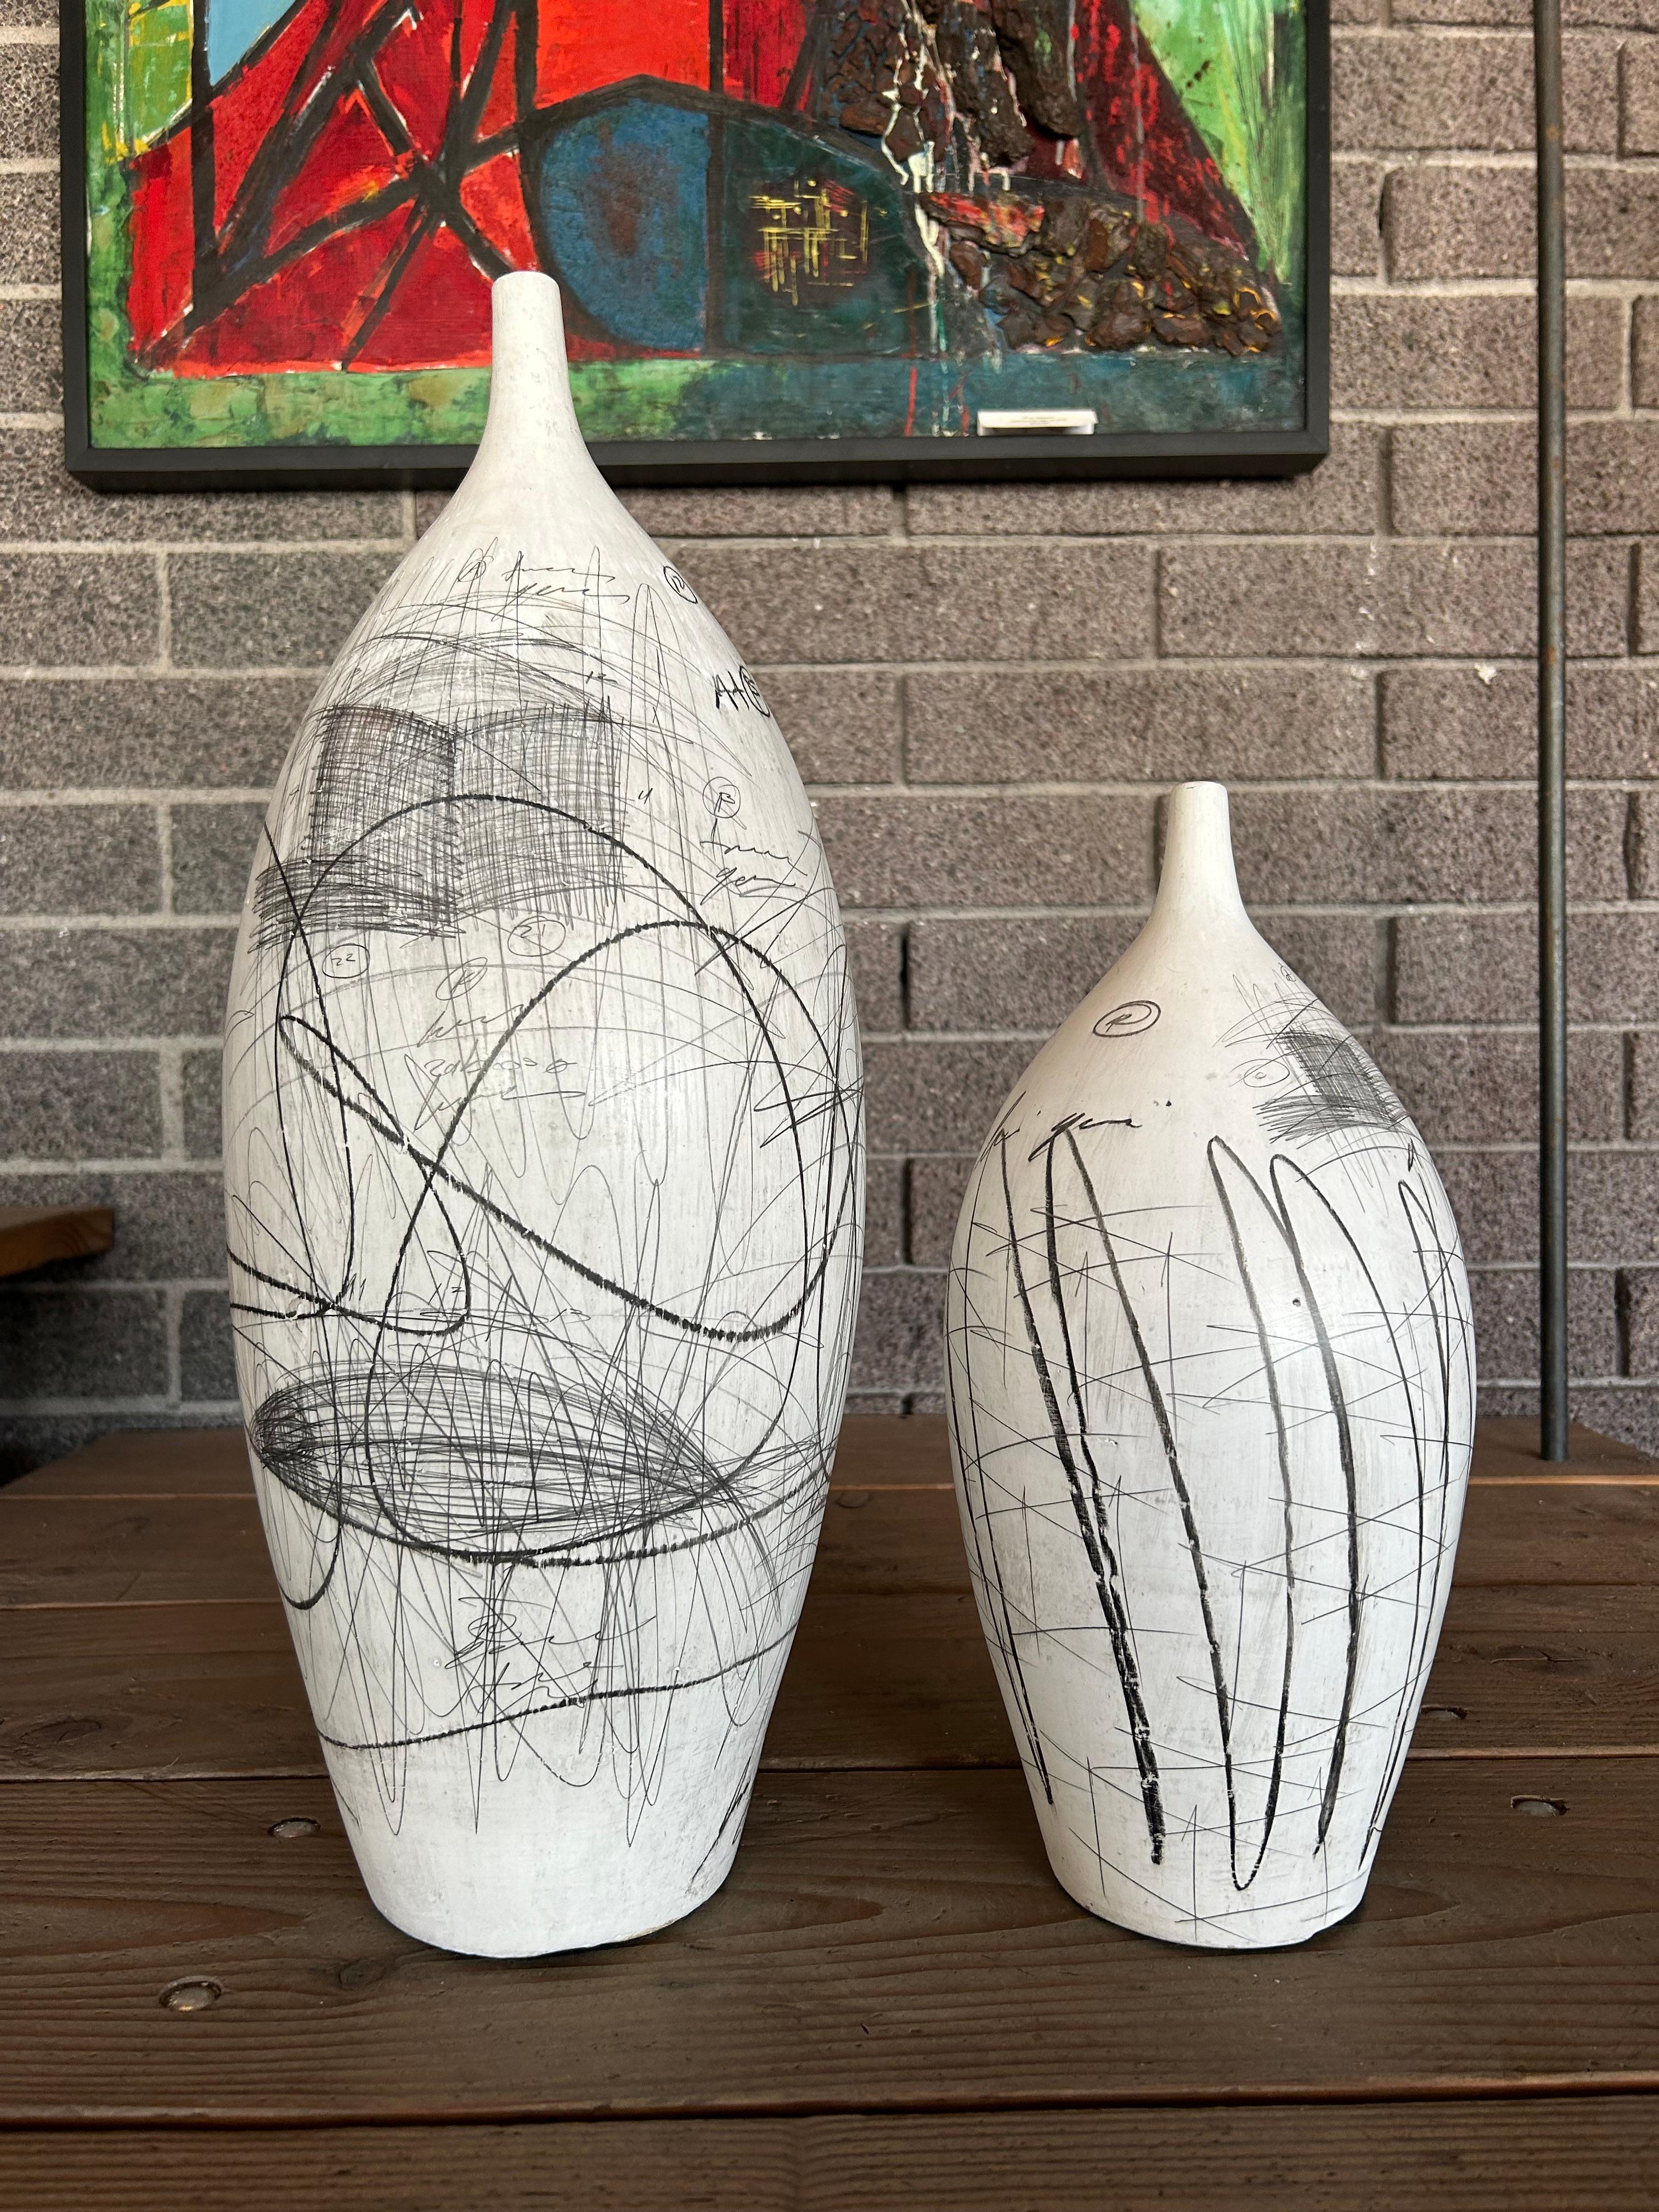 Pair of large scale Yuri Zatarain porcelain vases circa late 1980’s. These examples have the artists signature scraffito pencil work incorporated into the glaze. Price listed is for both works. 